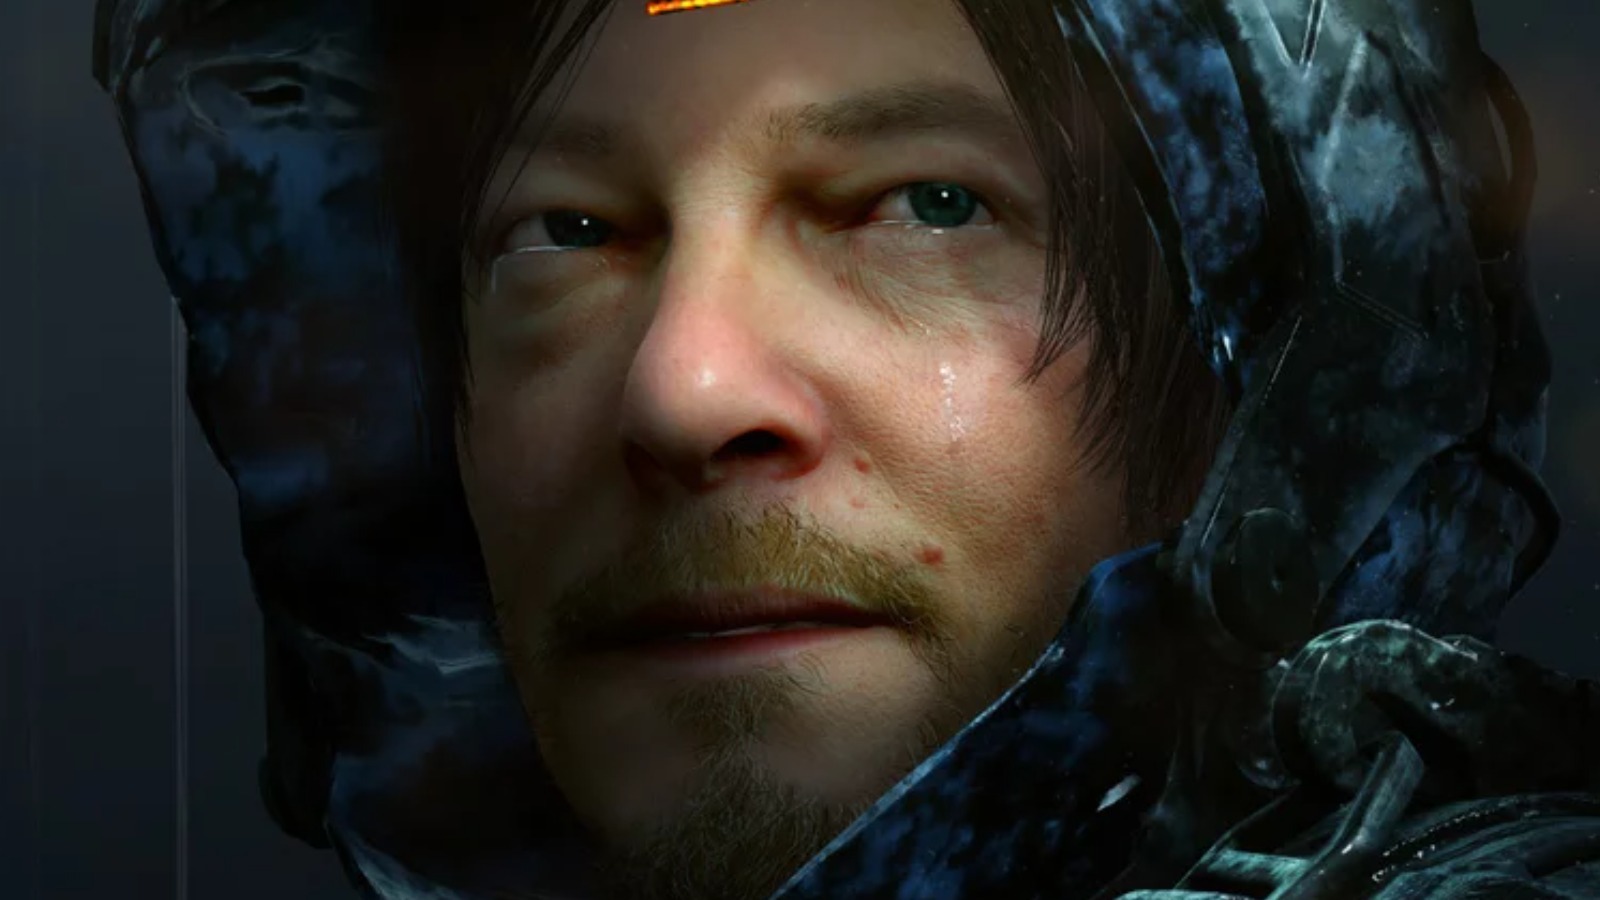 Why Death Stranding Fans Are Looking Forward To The Game Awards